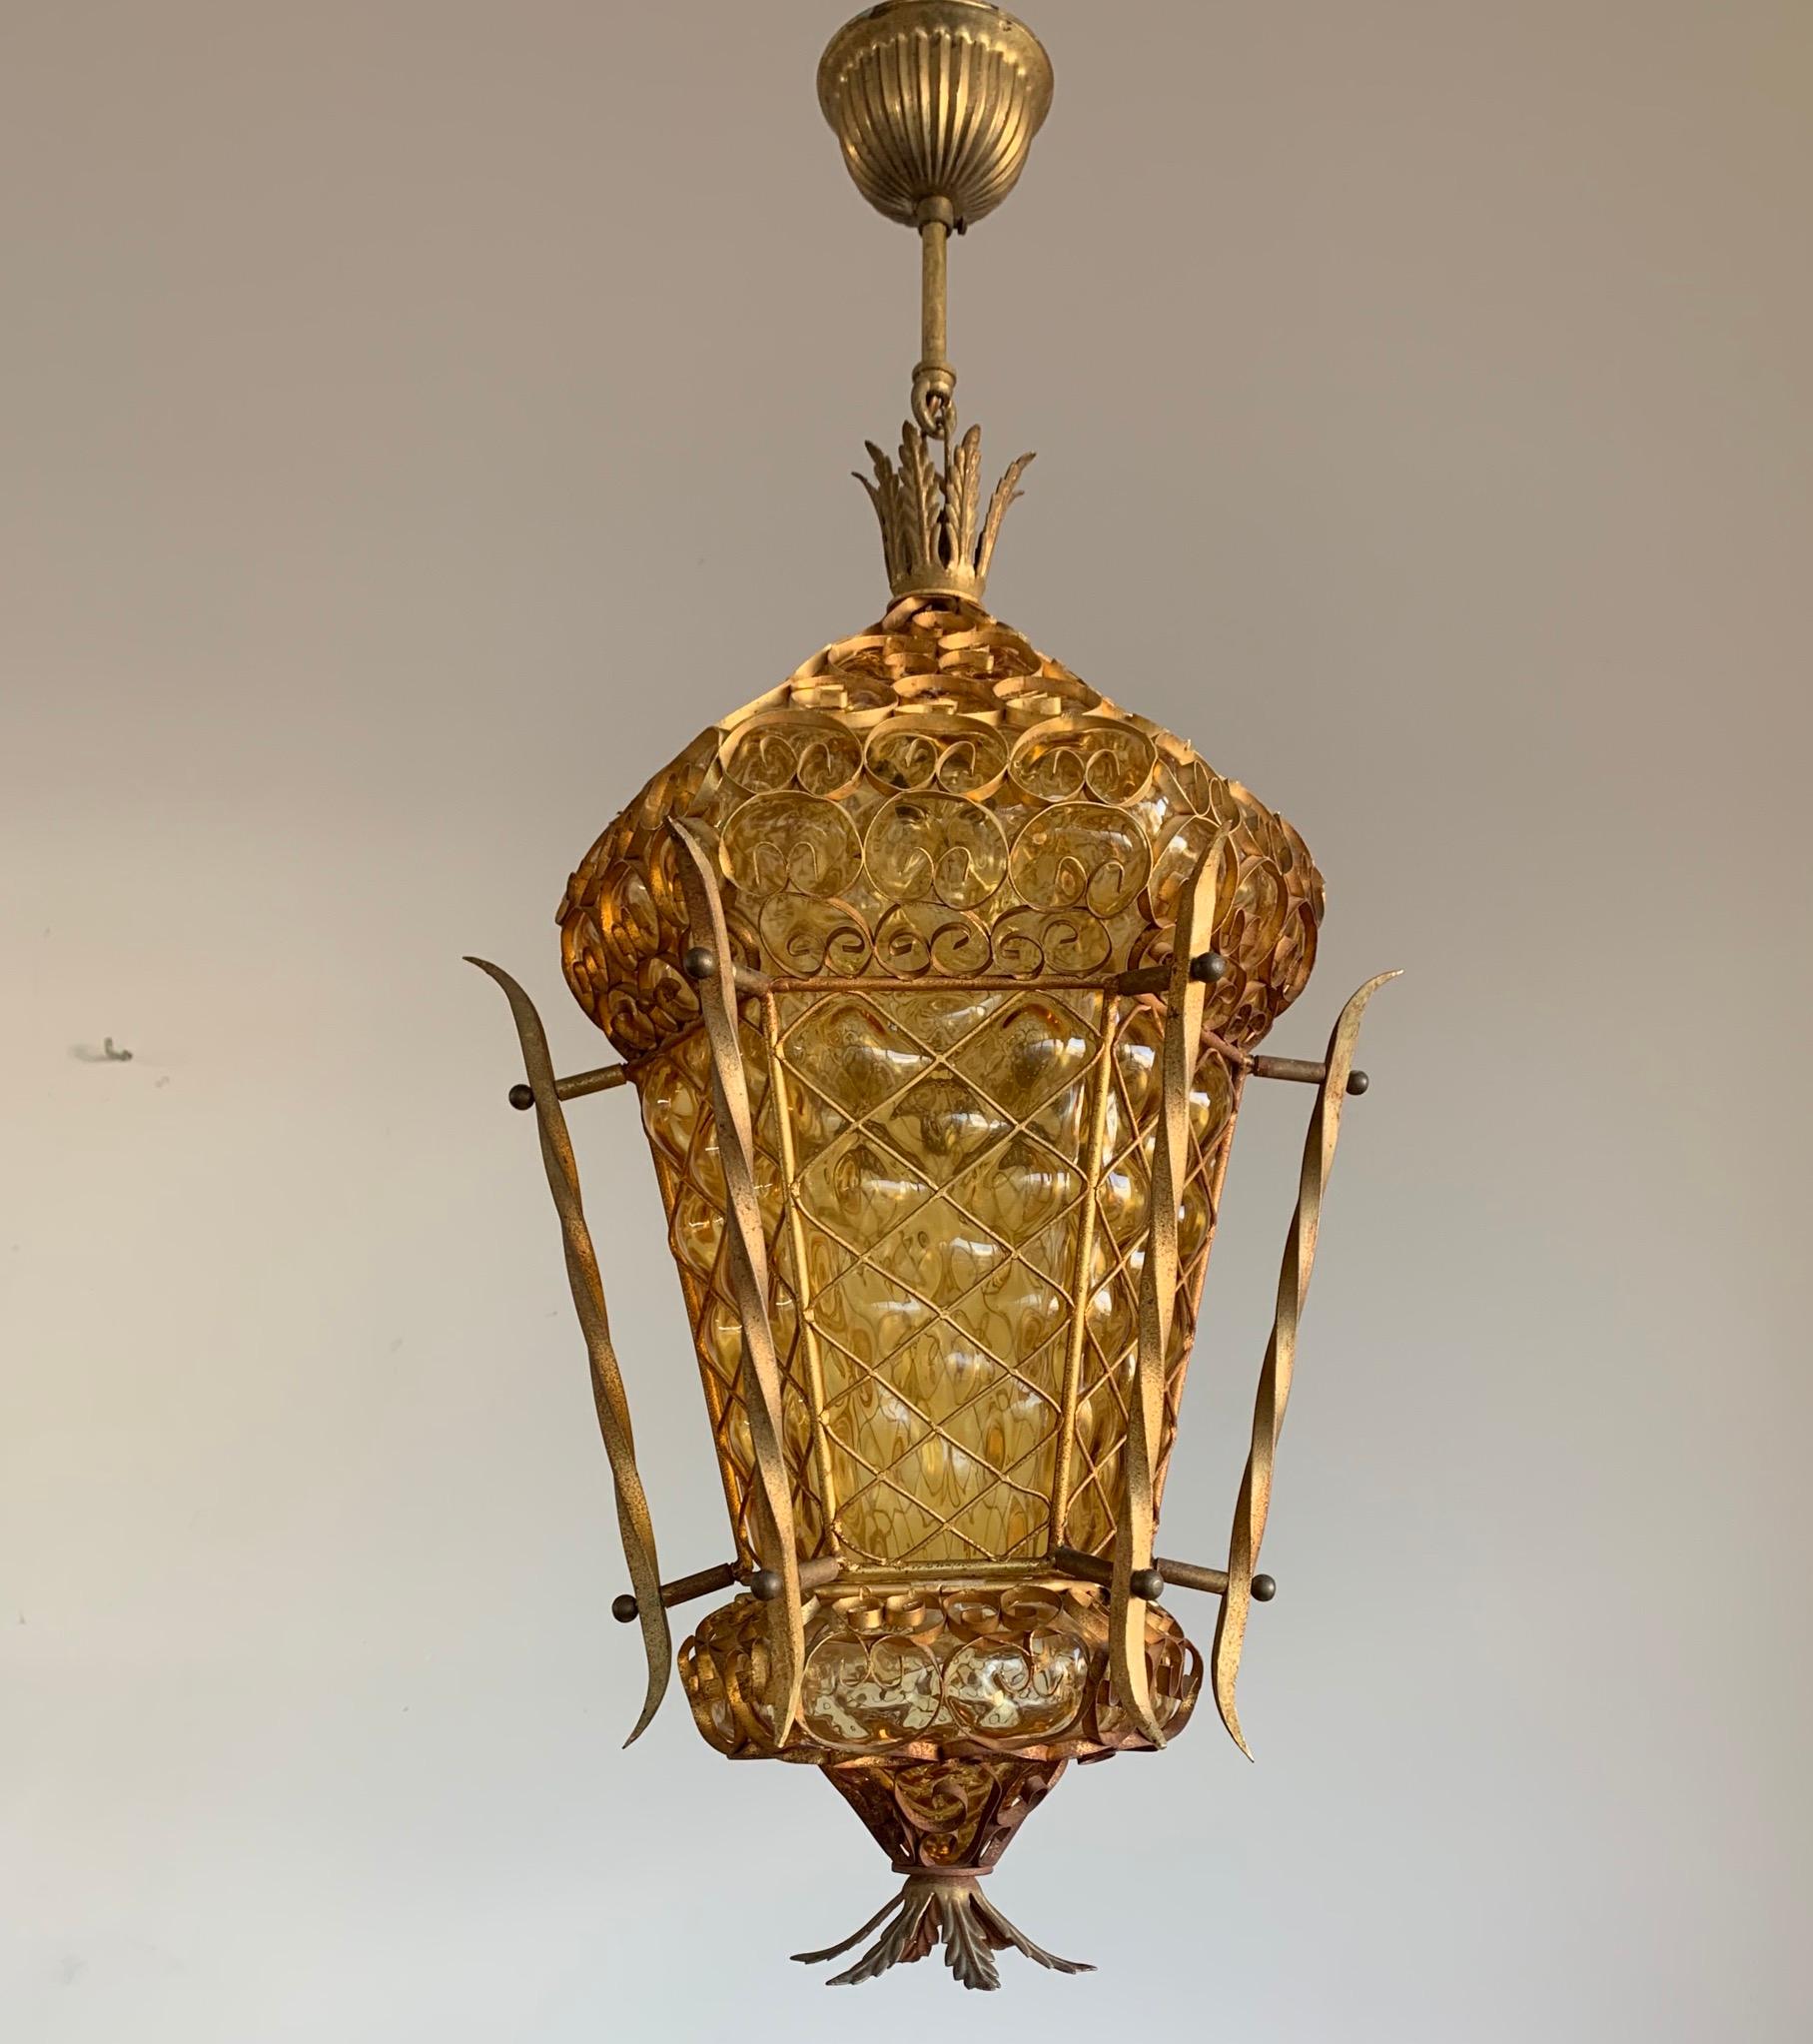 Remarkable and great condition Venetian light fixture with amber colored glass.

This near antique Venetian pendant is not only one of the largest we ever had the pleasure of offering, it also is a truly unique design. We have completely rewired